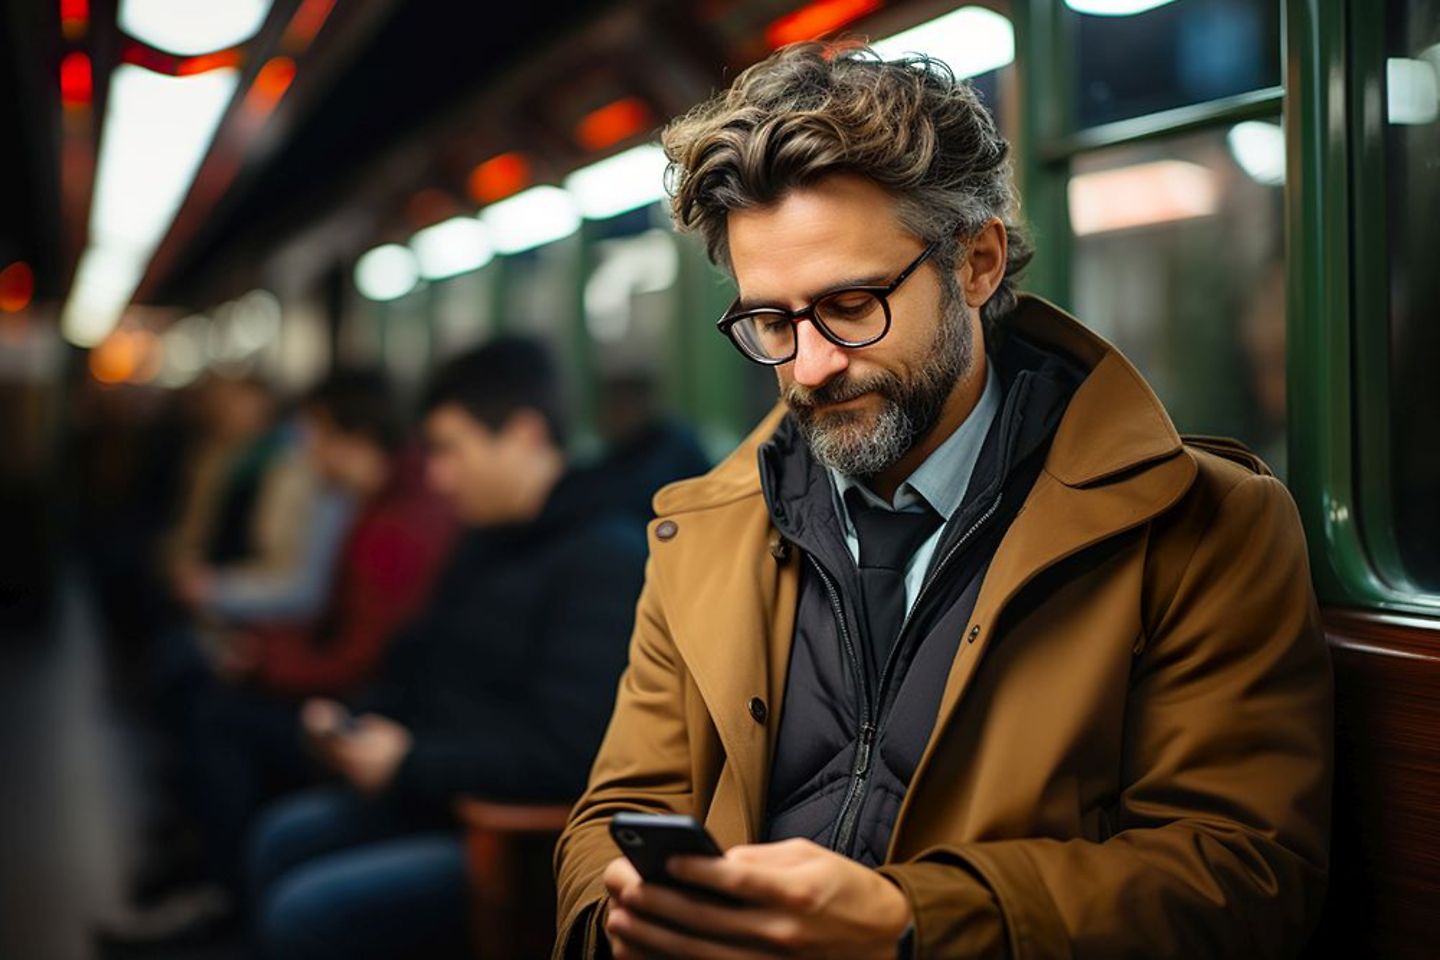 Man in glasses browsing internet inside a train